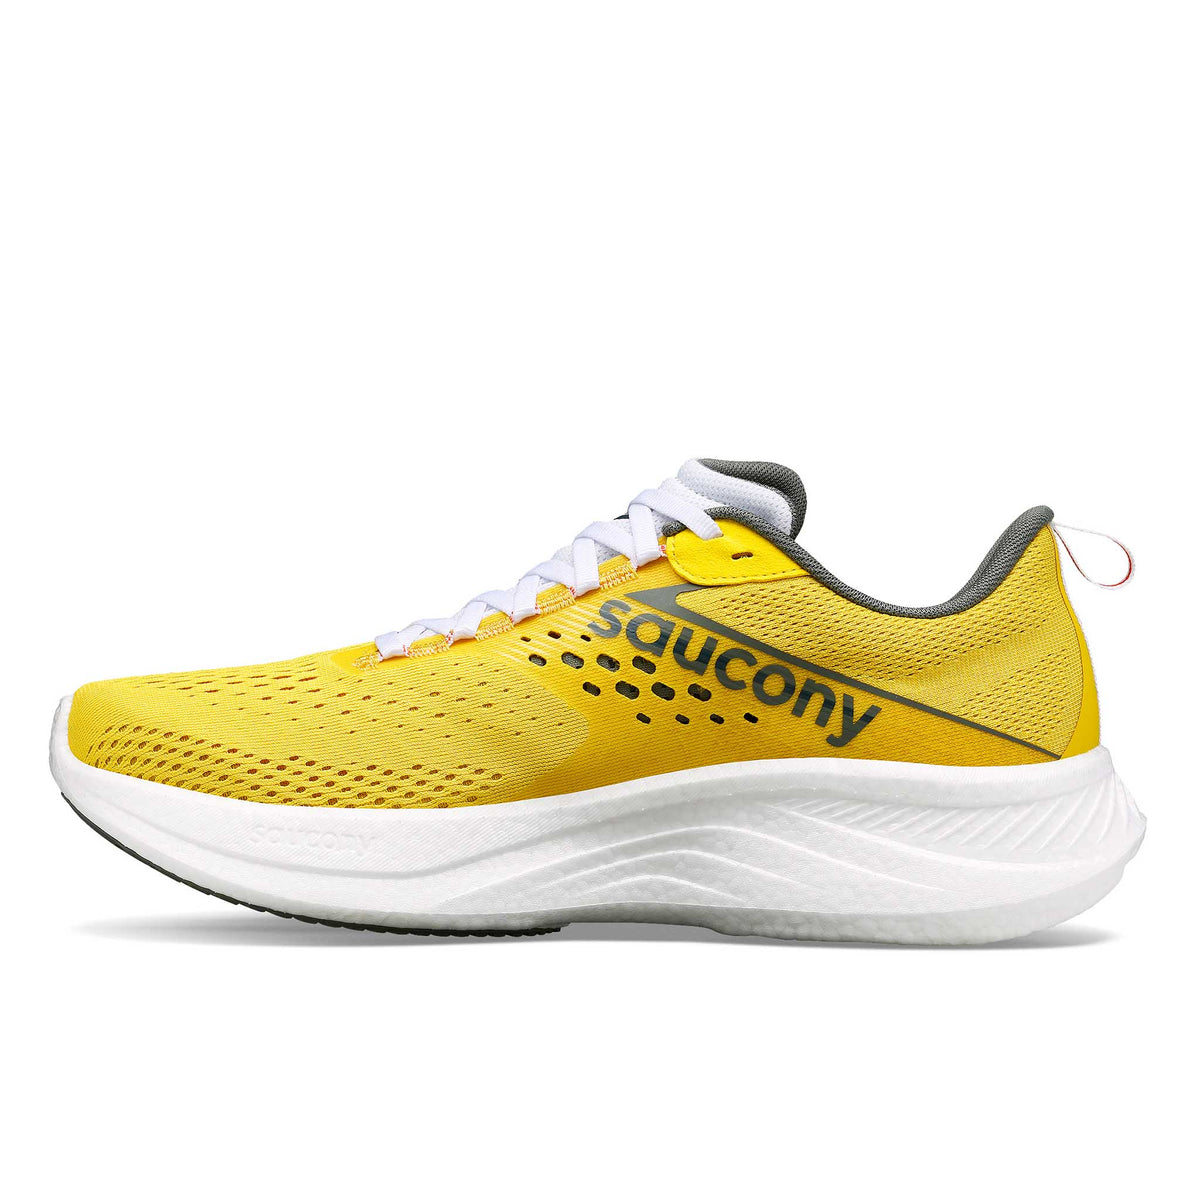 Saucony Ride 17 souliers de course homme lateral- Canary / Bough